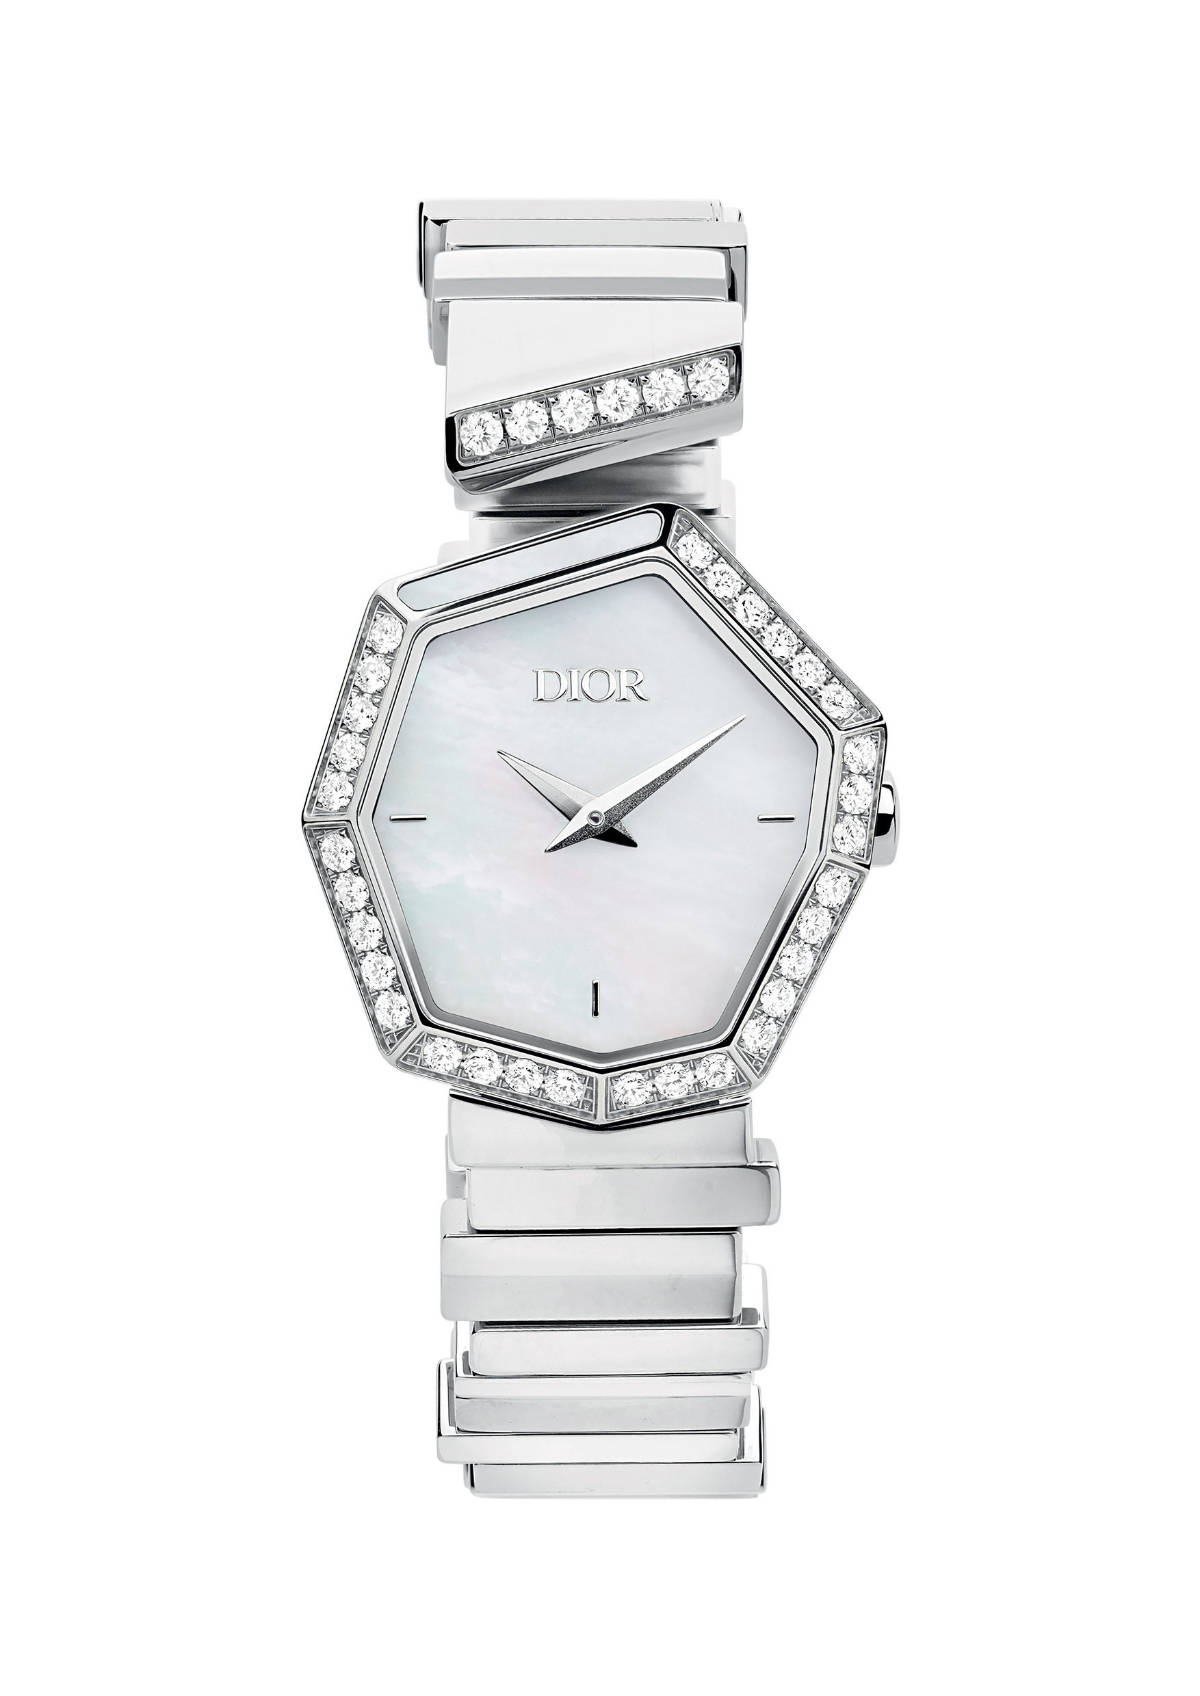 Dior Presents Its New Watch Collection: GEM DIOR